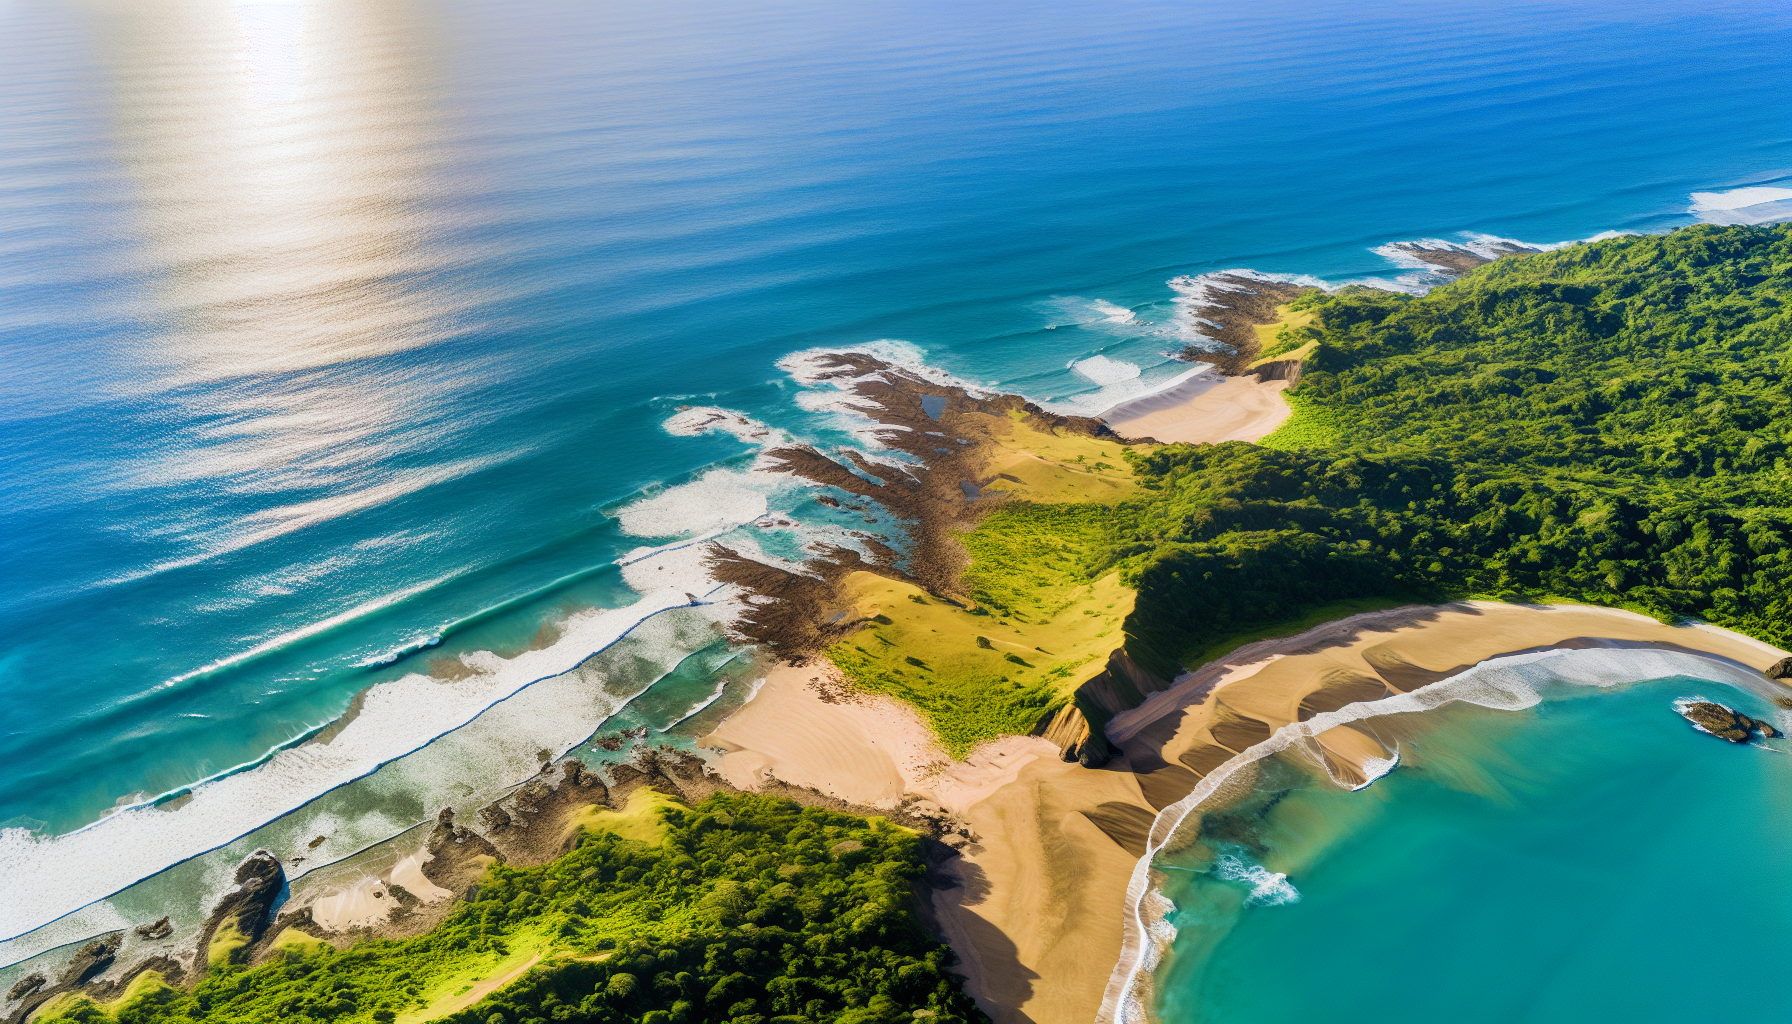 Aerial view of Costa Rica's Pacific Coast